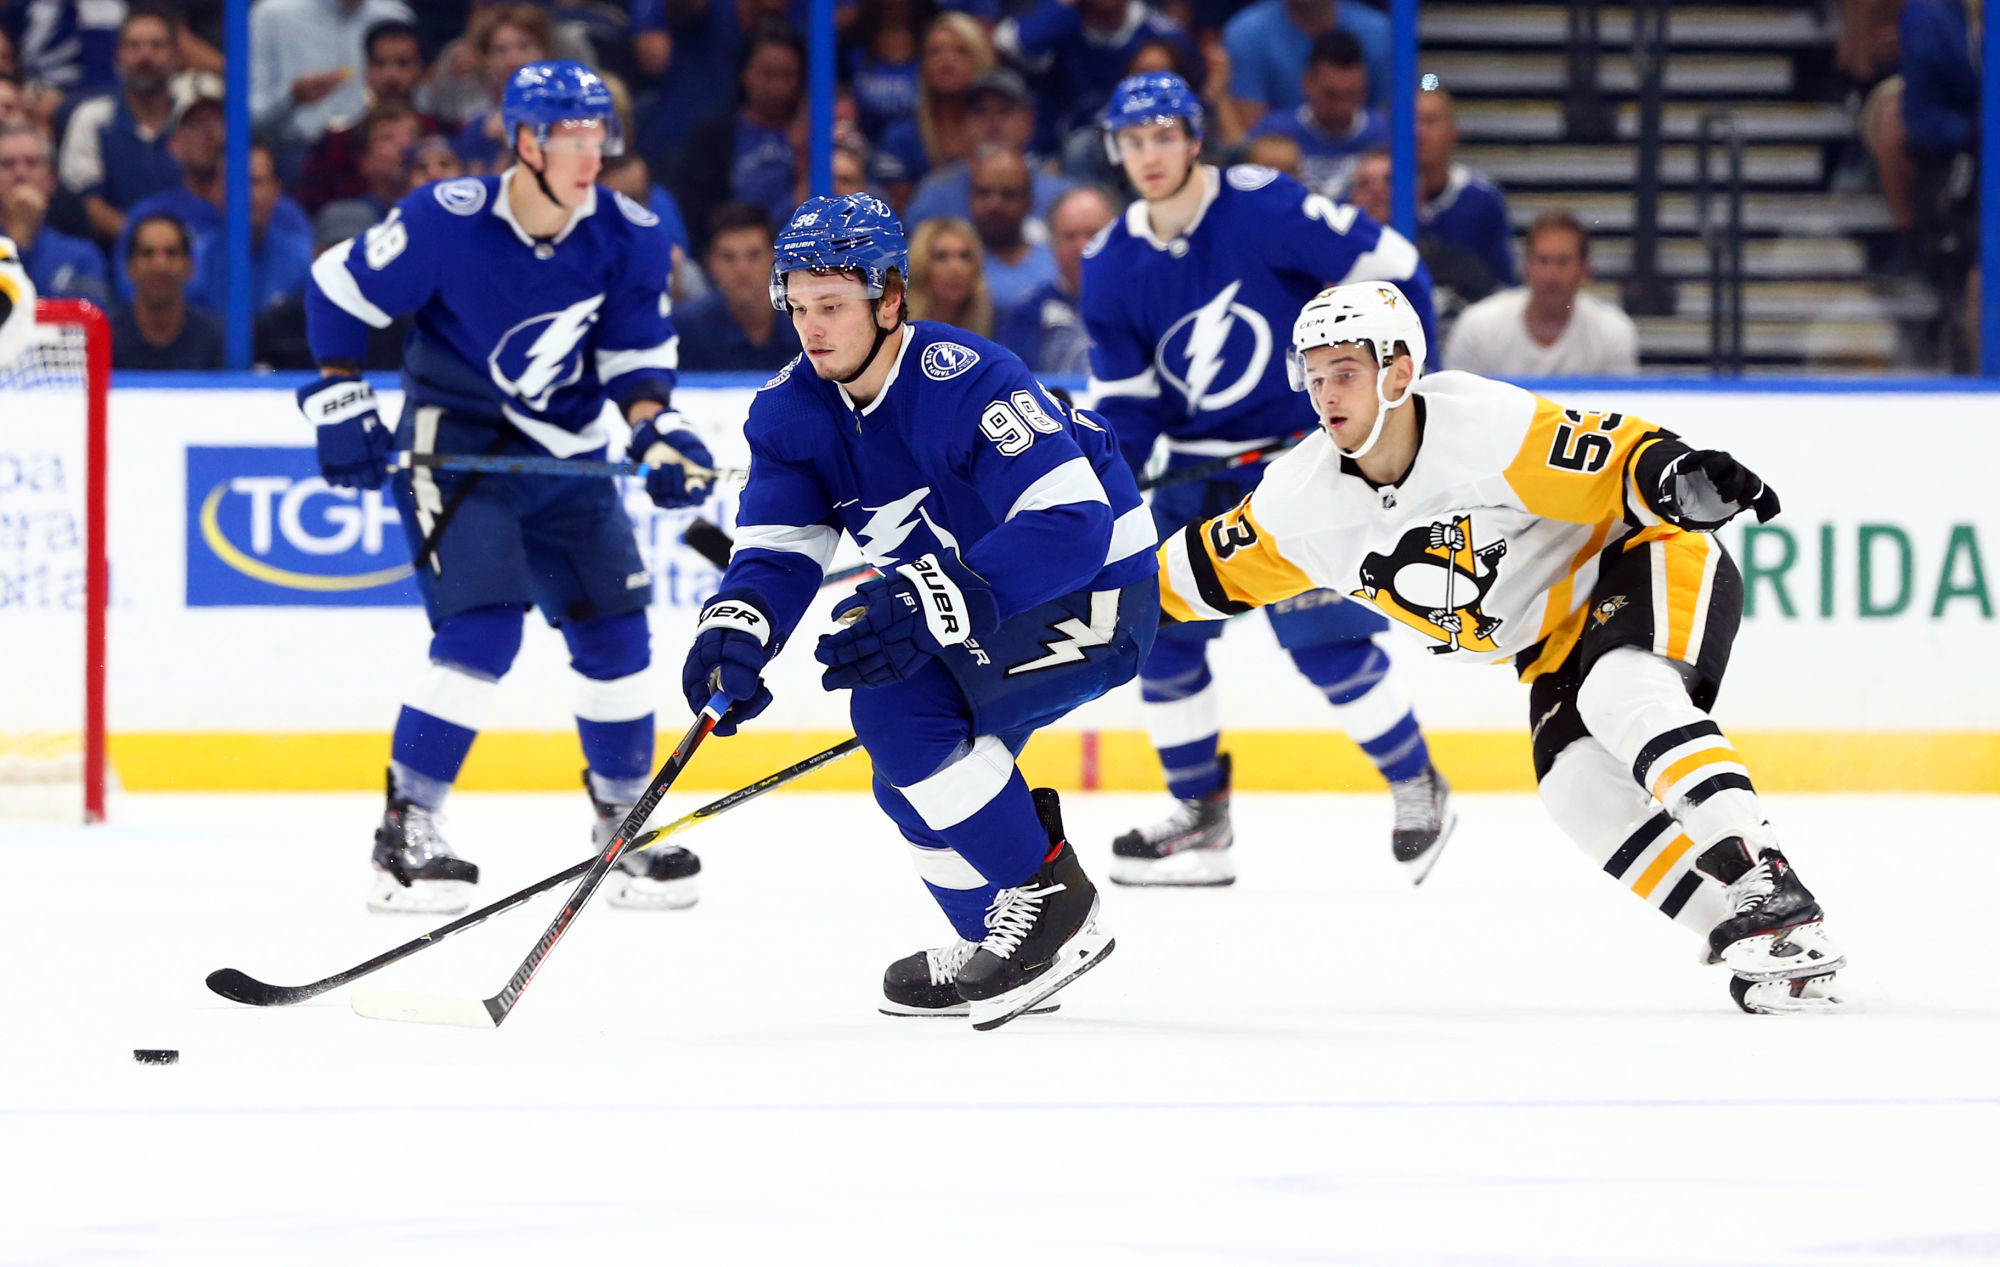 Oct 23, 2019; Tampa, FL, USA; Tampa Bay Lightning defenseman Mikhail Sergachev (98) skates with the puck as Pittsburgh Penguins center Teddy Blueger (53) defends during the first period at Amalie Arena. Mandatory Credit: Kim Klement-USA TODAY Sports 

Photo by Icon Sport - Teddy BLUEGER - Mikhail SERGACHEV - Amalie Arena - Tampa (Etats Unis)